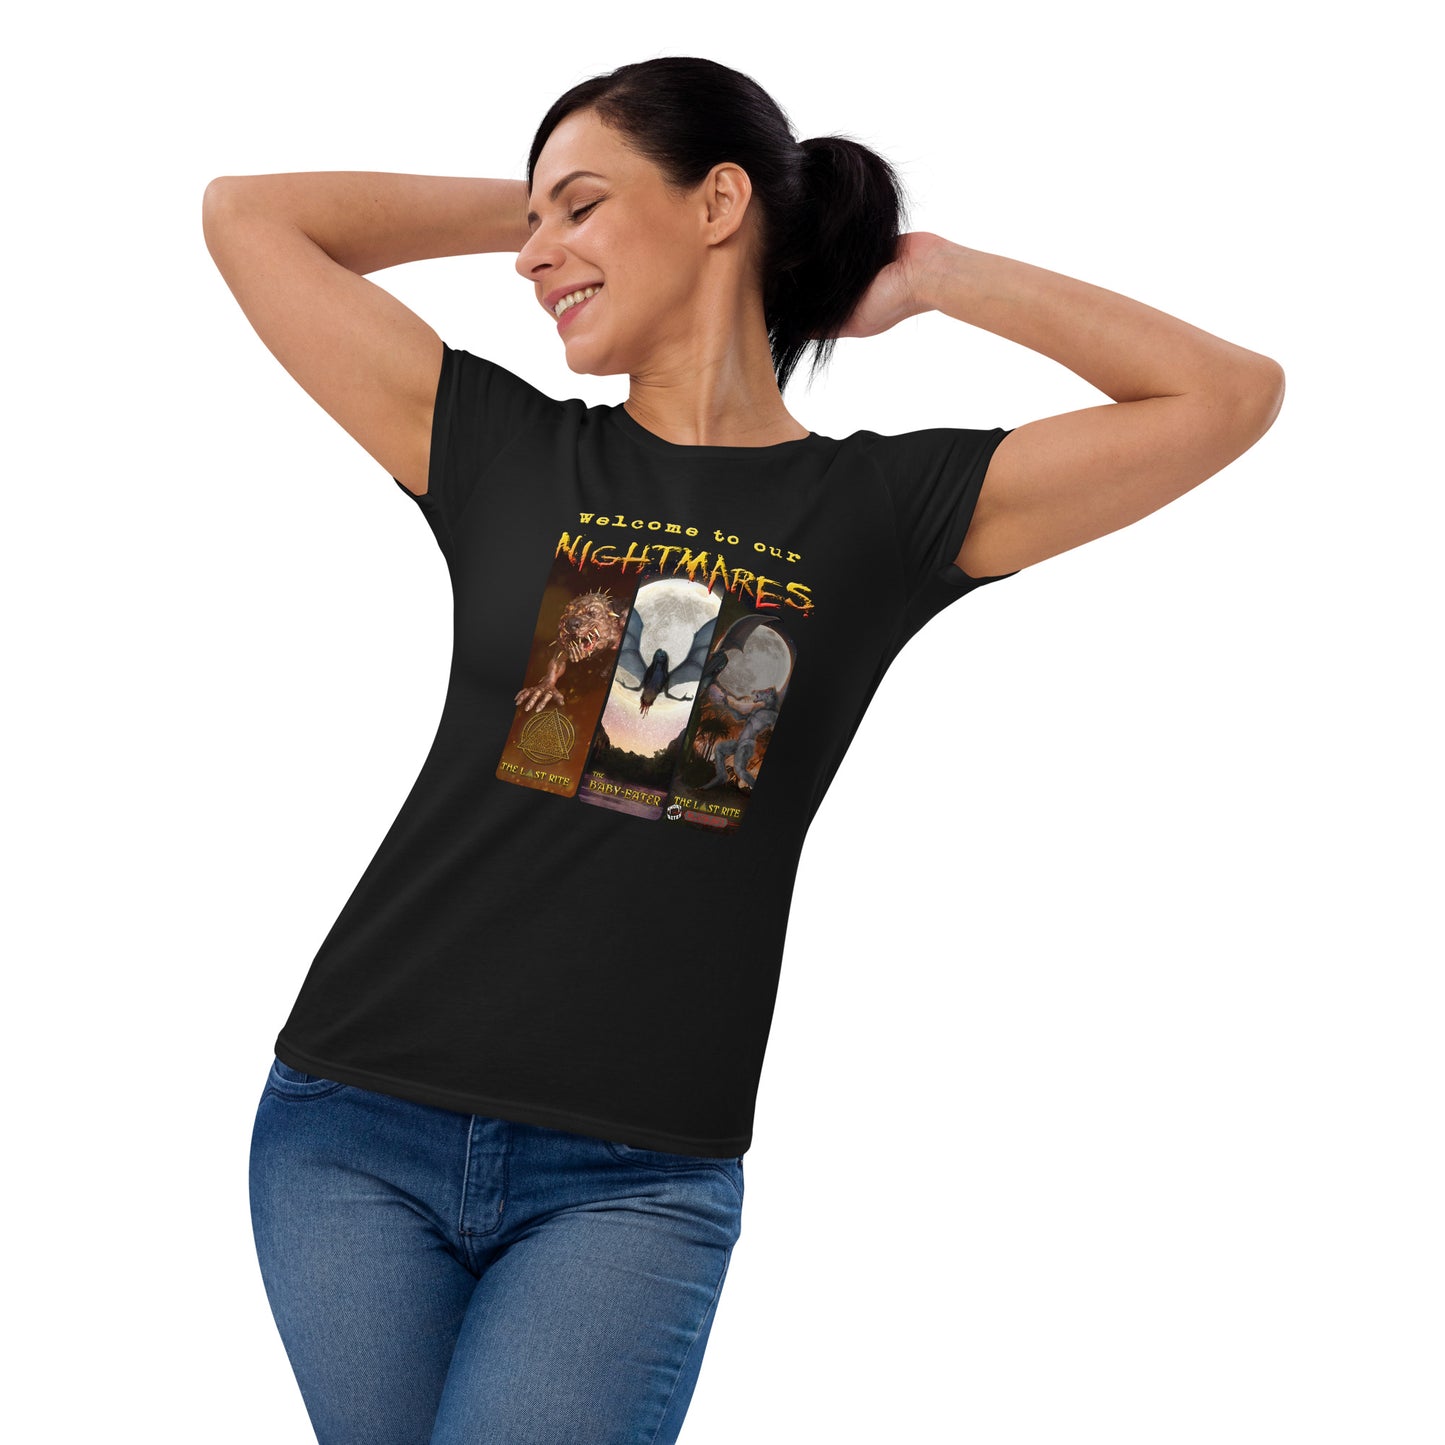 Welcome to our Nightmares | Women's Short Sleeve T-Shirt - Embrace Horror Elegance